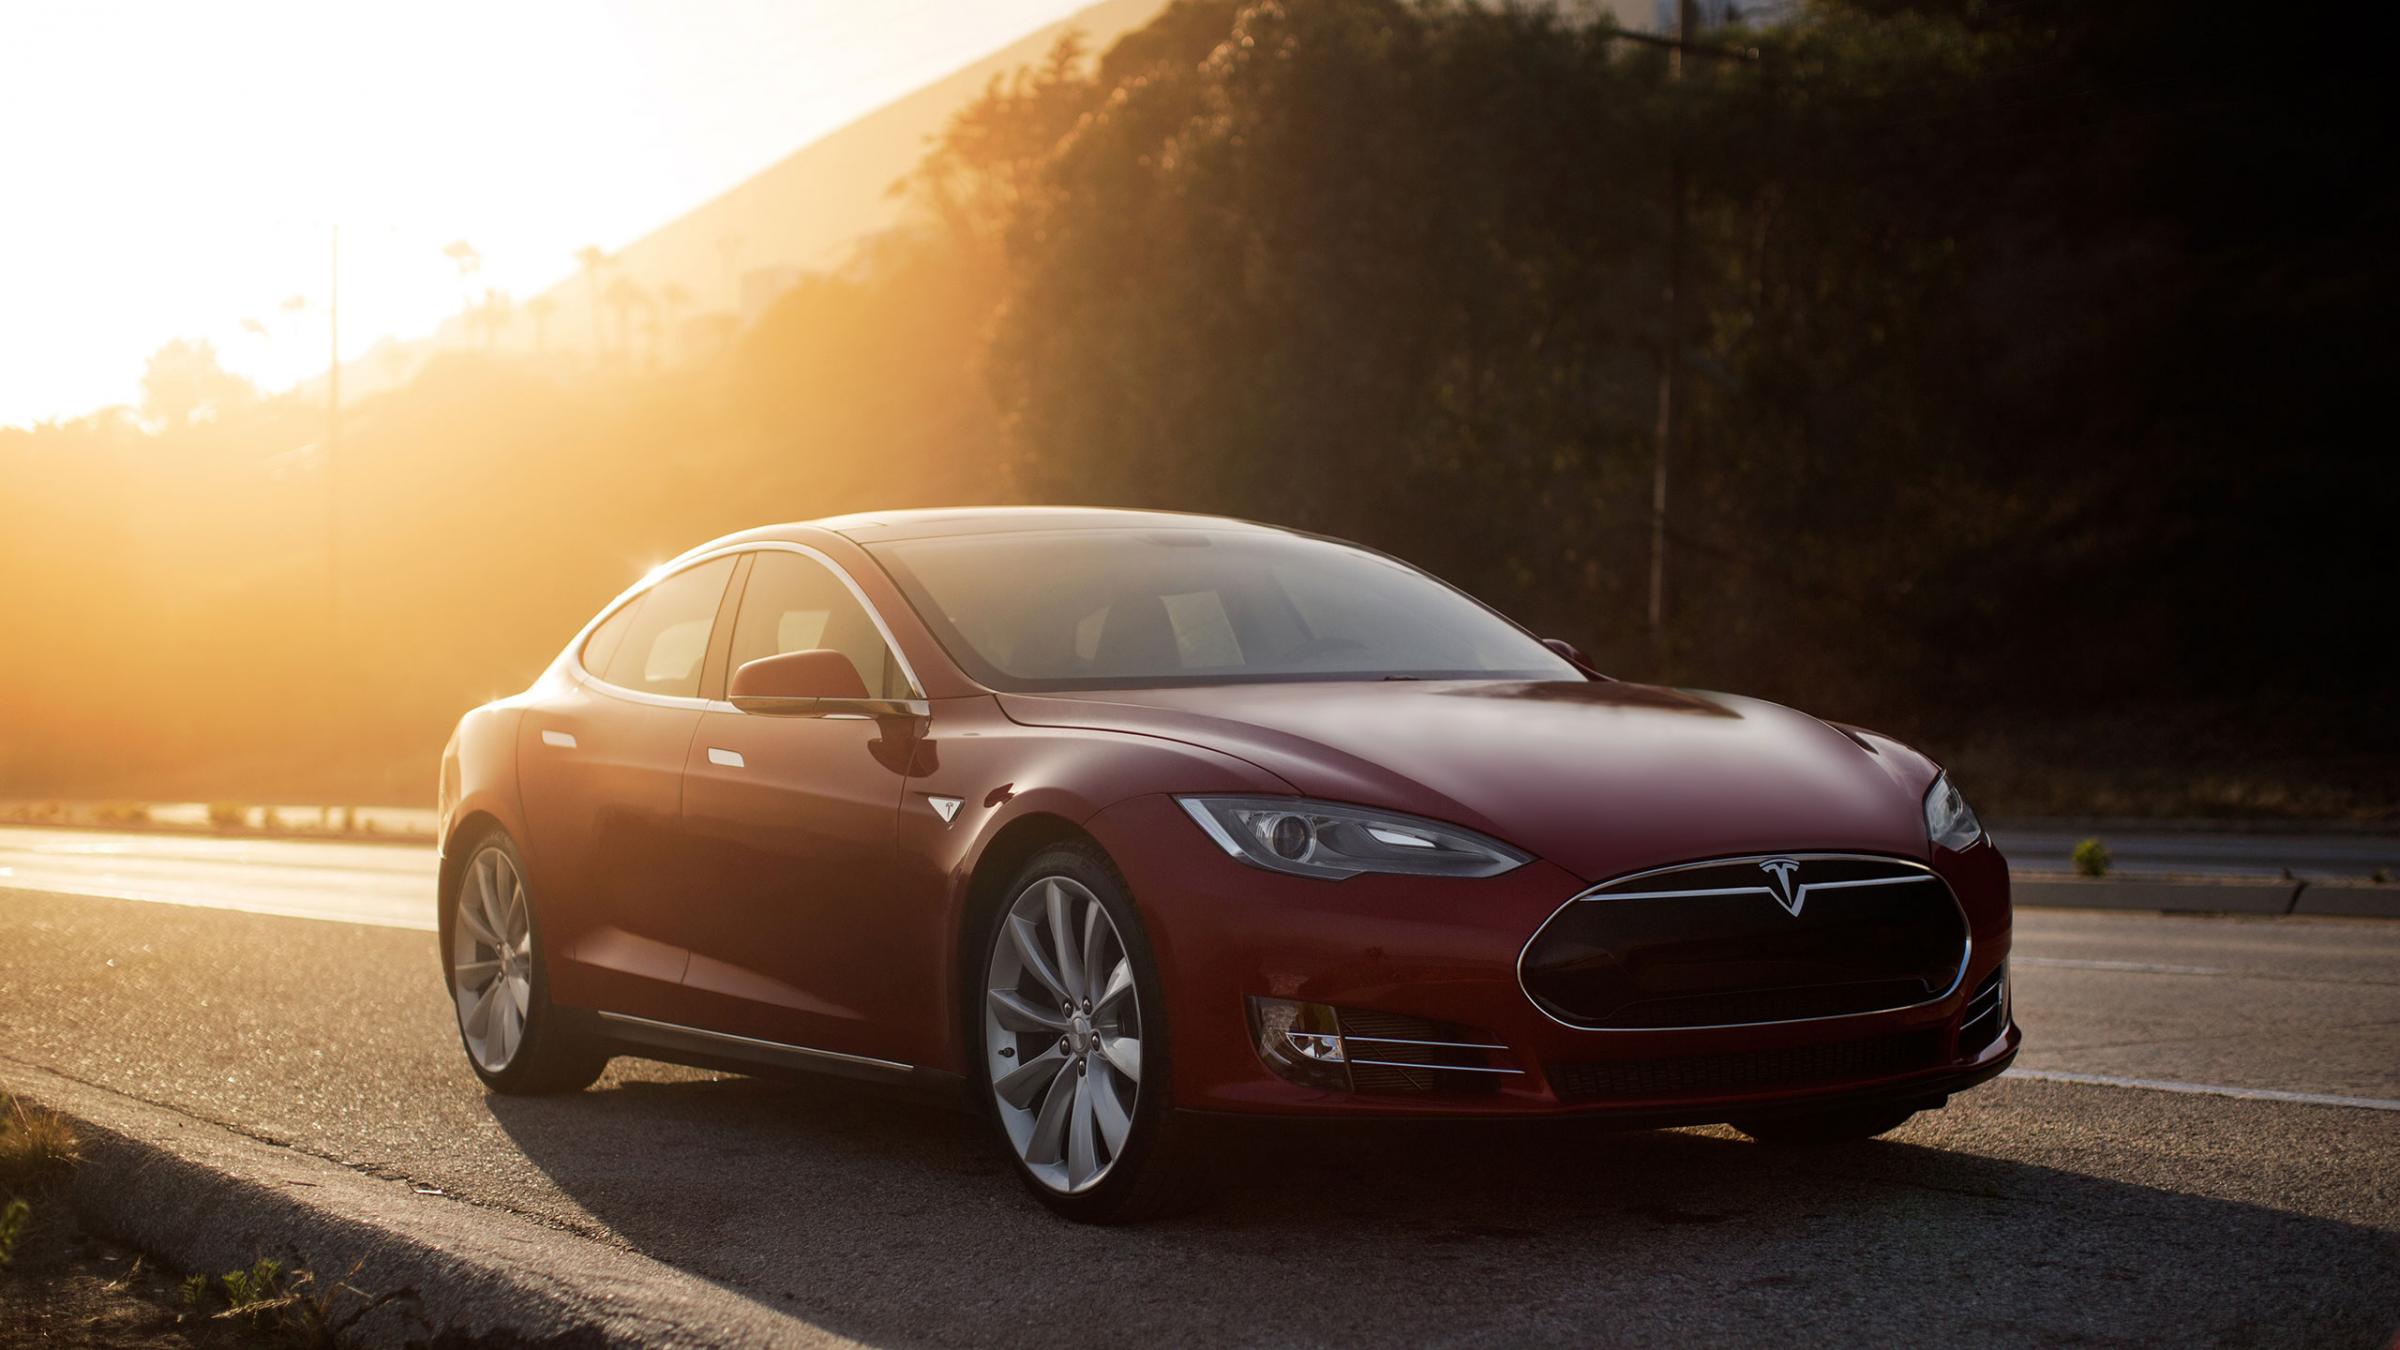 The Tesla Model S on the road